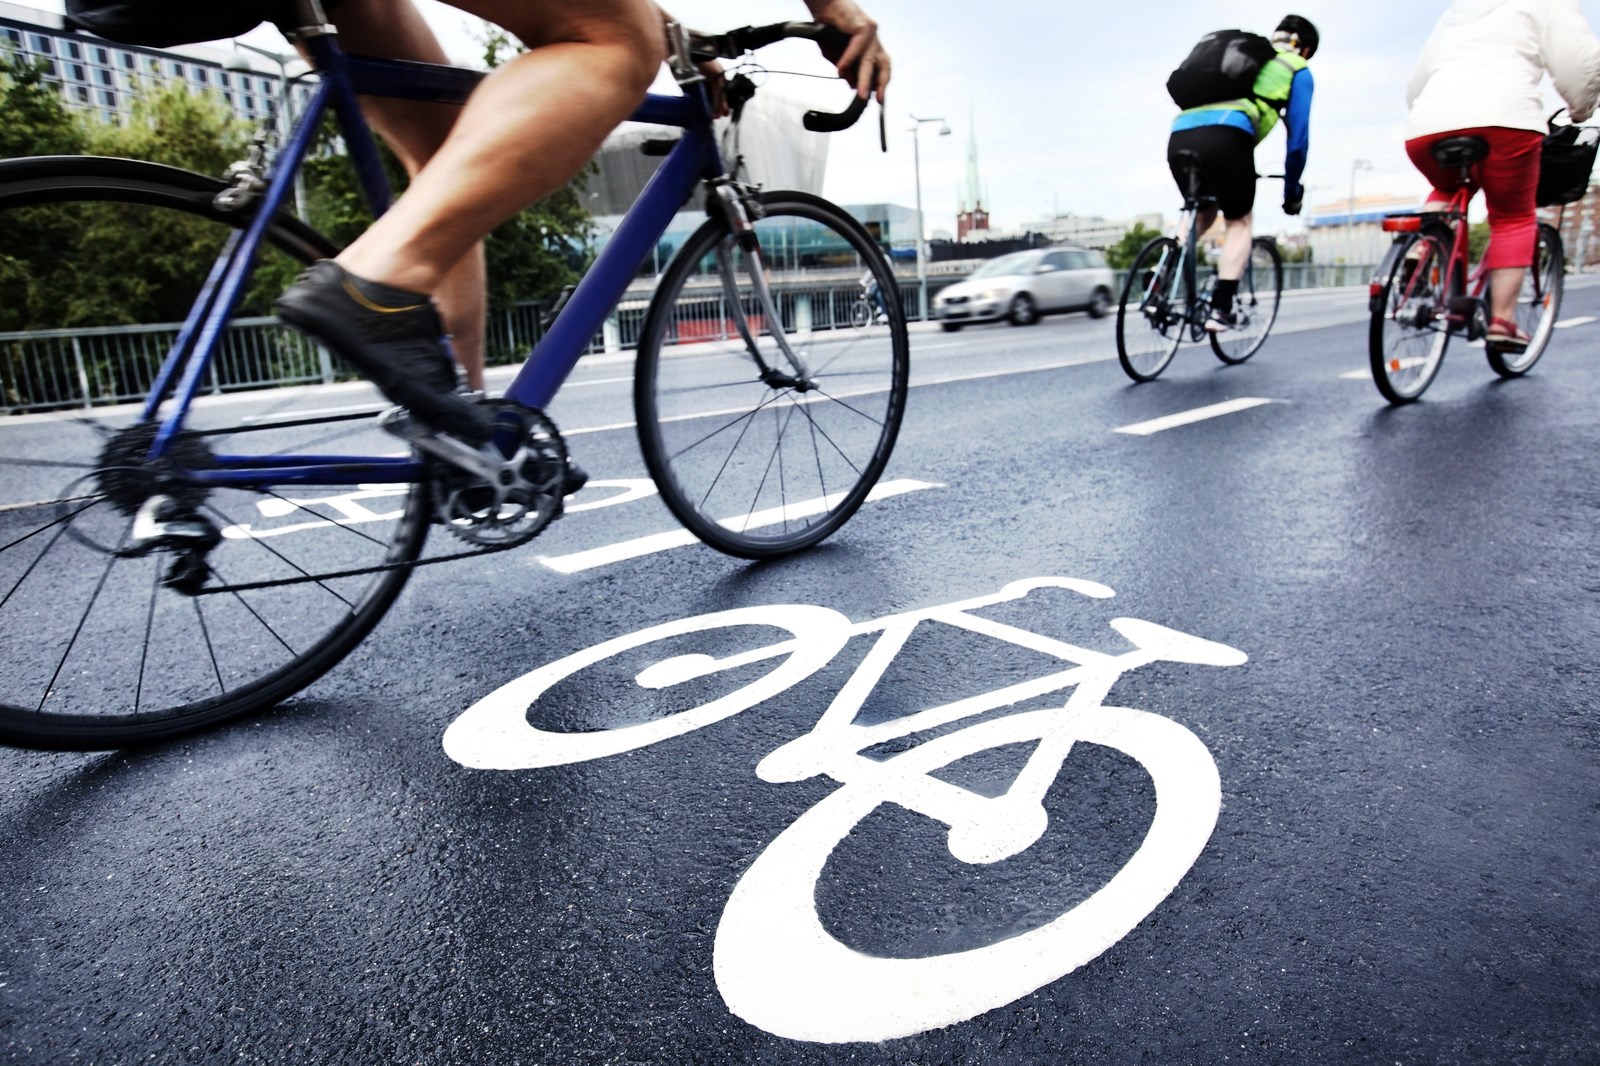 How To Plan A Bike Route For Your Commute - I Love Bicycling